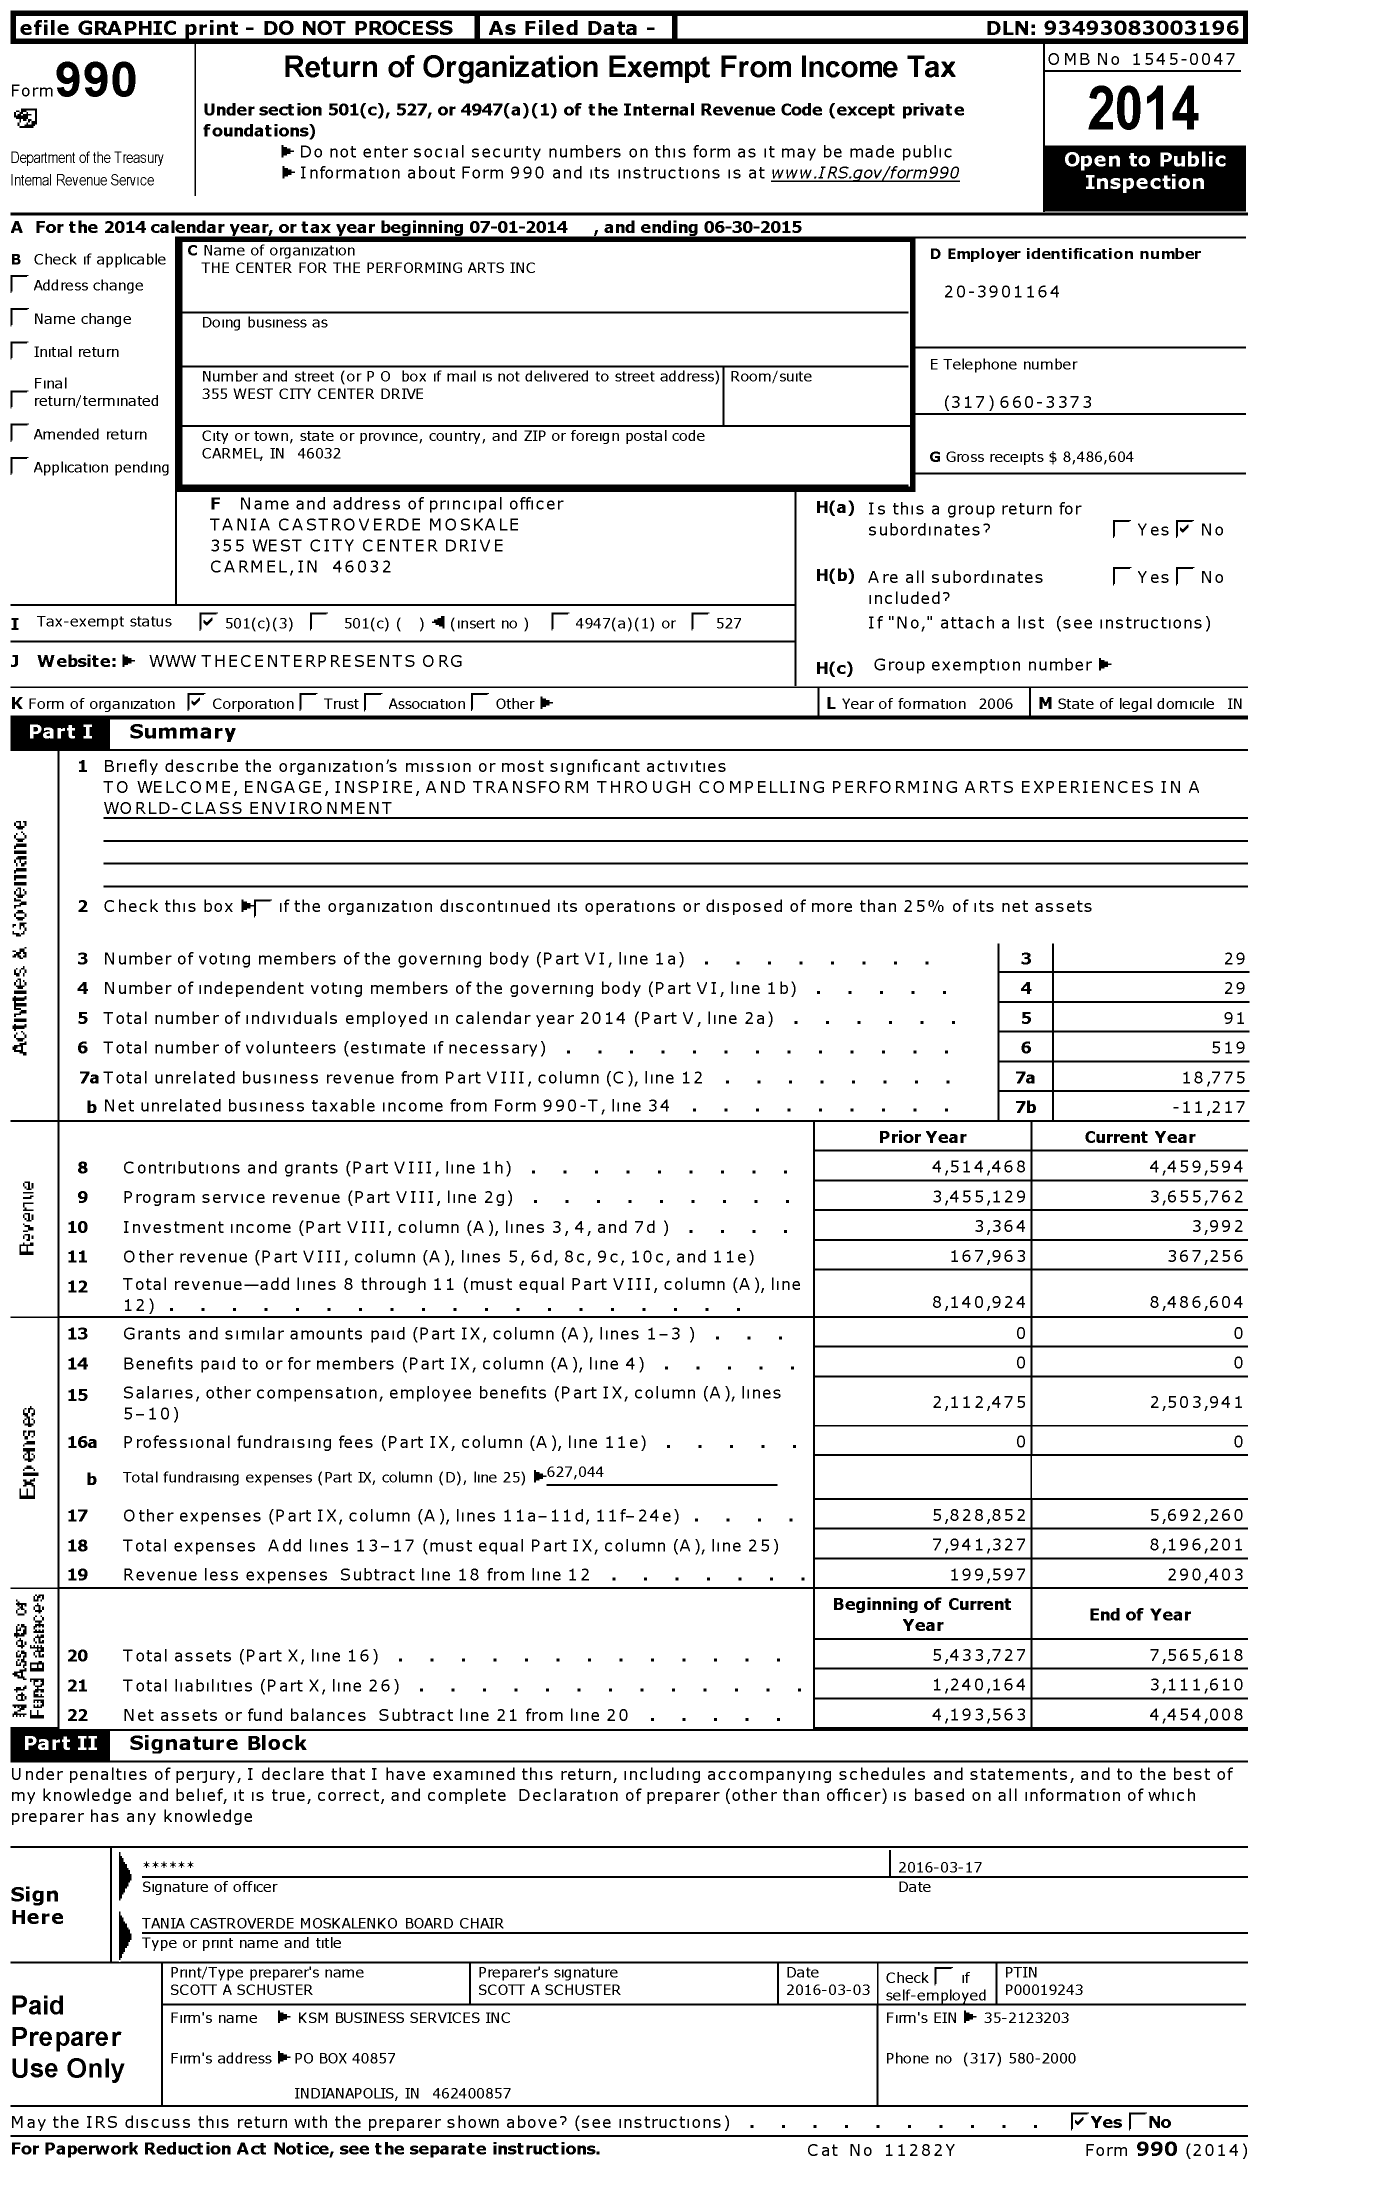 Image of first page of 2014 Form 990 for The Center for the Performing Arts